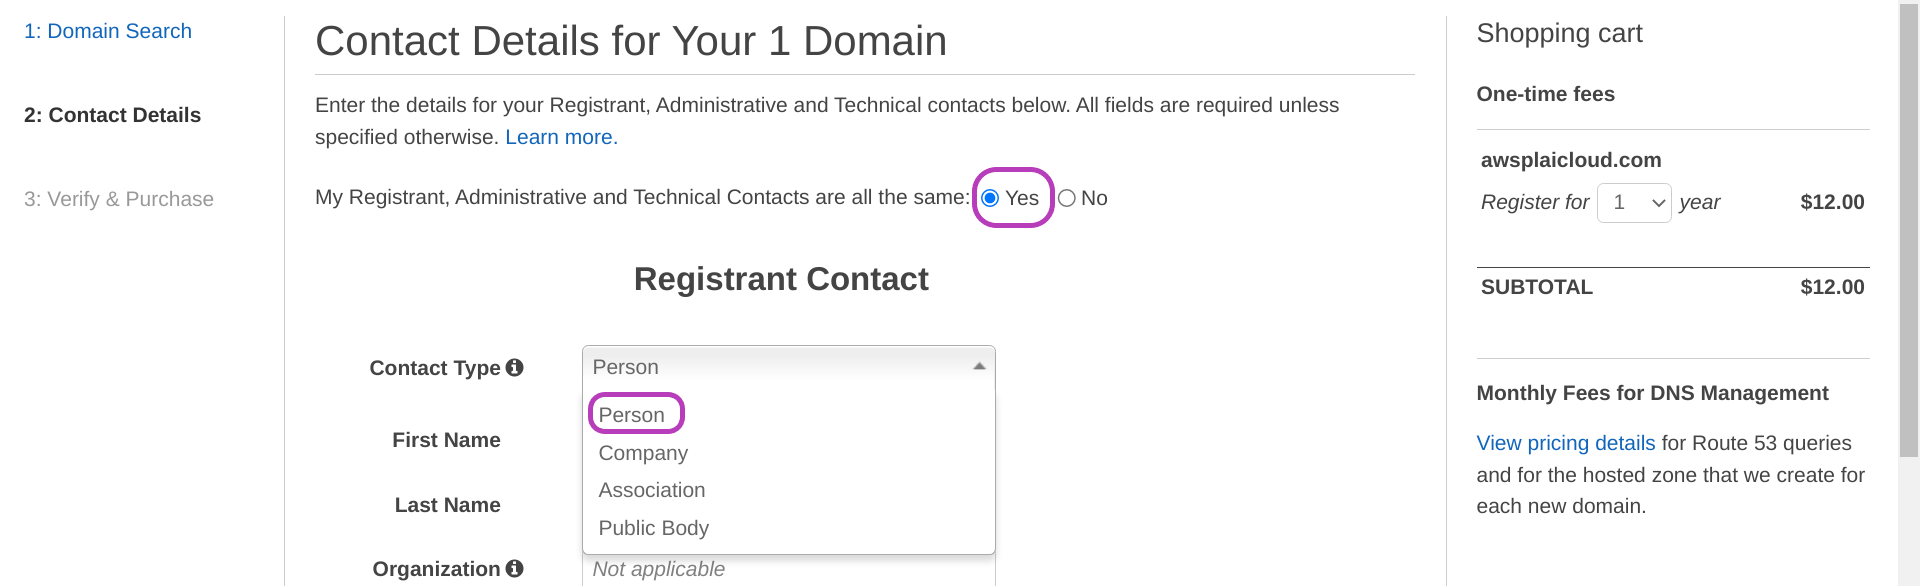 Screenshot of AWS Console "Contact Details for Your 1 Domain" page in a browser with the following two items circled: above the middle to the right, the Yes button for the option "My Registrant, Administrative, and Technical Contacts are all the same", and in the middle the "Person" value for the option "Contact Type".